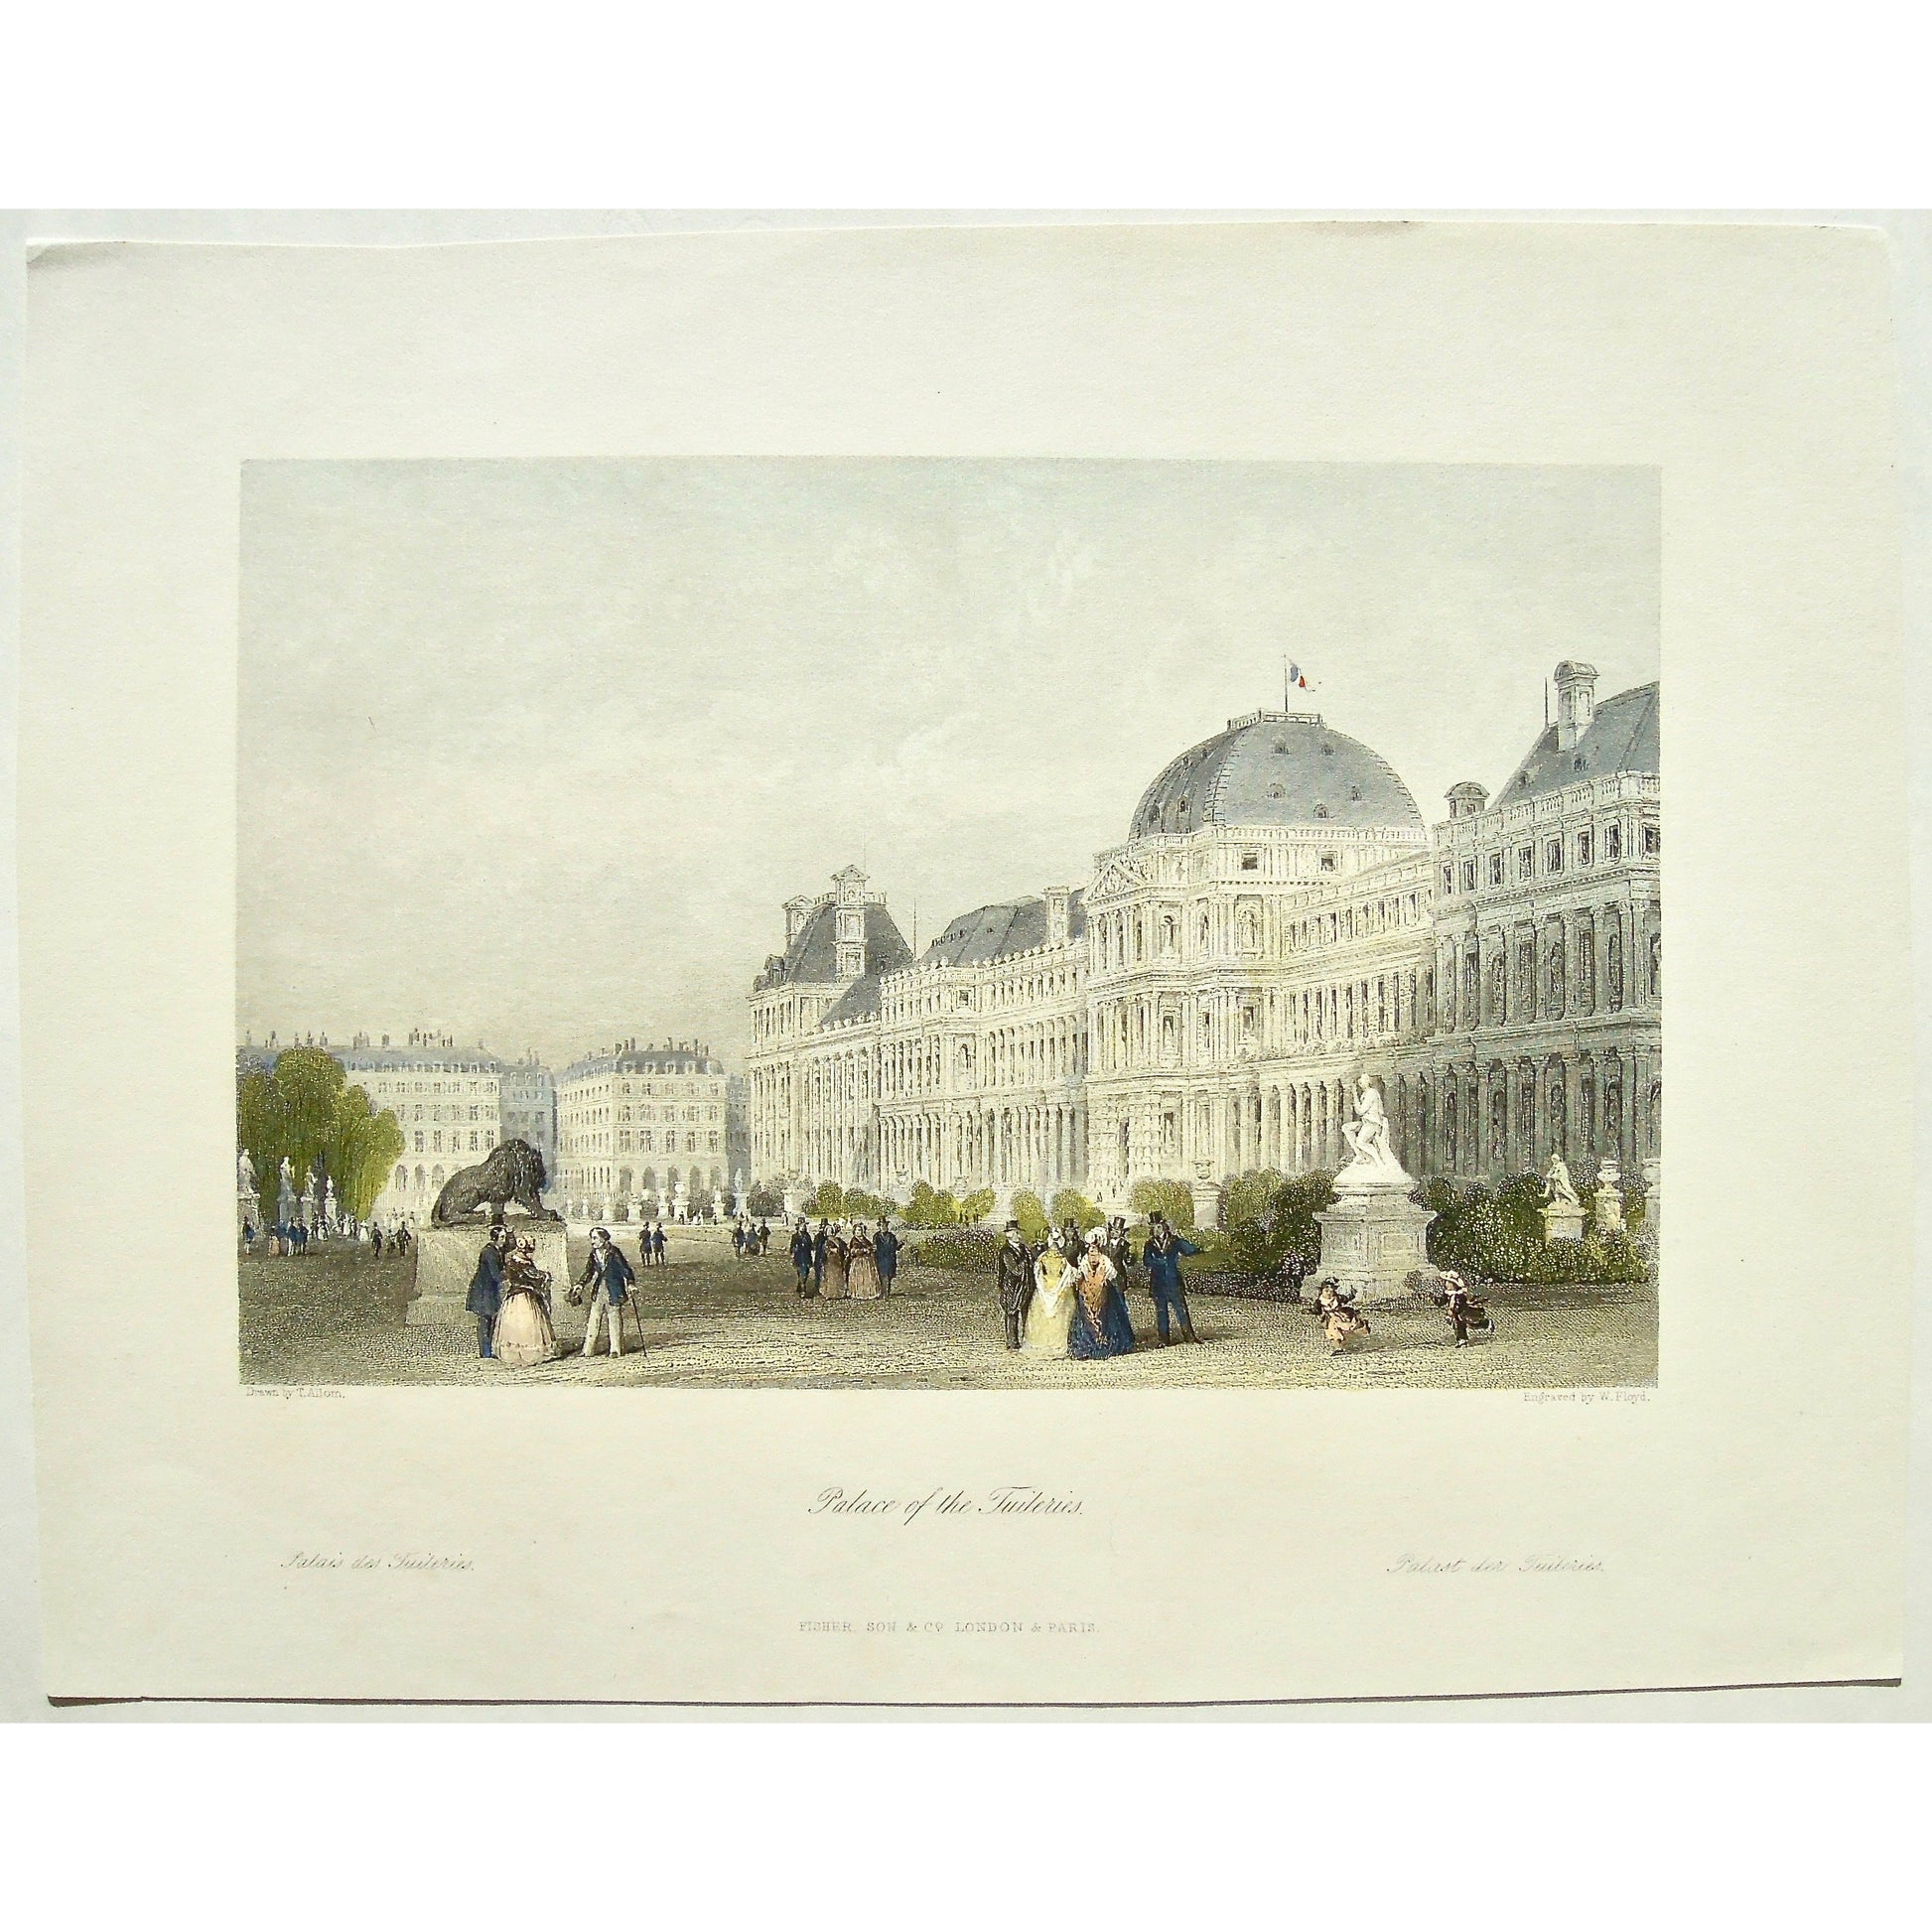 Palace of the Tuileries, Palace, Tuileries, Palais, Palais des Tuileries, Palast, Palast der Tuileries, Exterior, Building, Buildings, architecture, Socializing, French Style, French Dress, Renaissance, Renaissance Architecture, Royal, Imperial palace, Paris, Louis XIII, Louis XIV, Louis XV, Louis XVI, Napoleon, Residence, Tuileries Palace, Garden, Gardens, Strolling, French Revolution, Baroque, Detailed design, France, France Illustrated, Exhibiting its Landscape Scenery, Antiquities, Military and Ecclesia